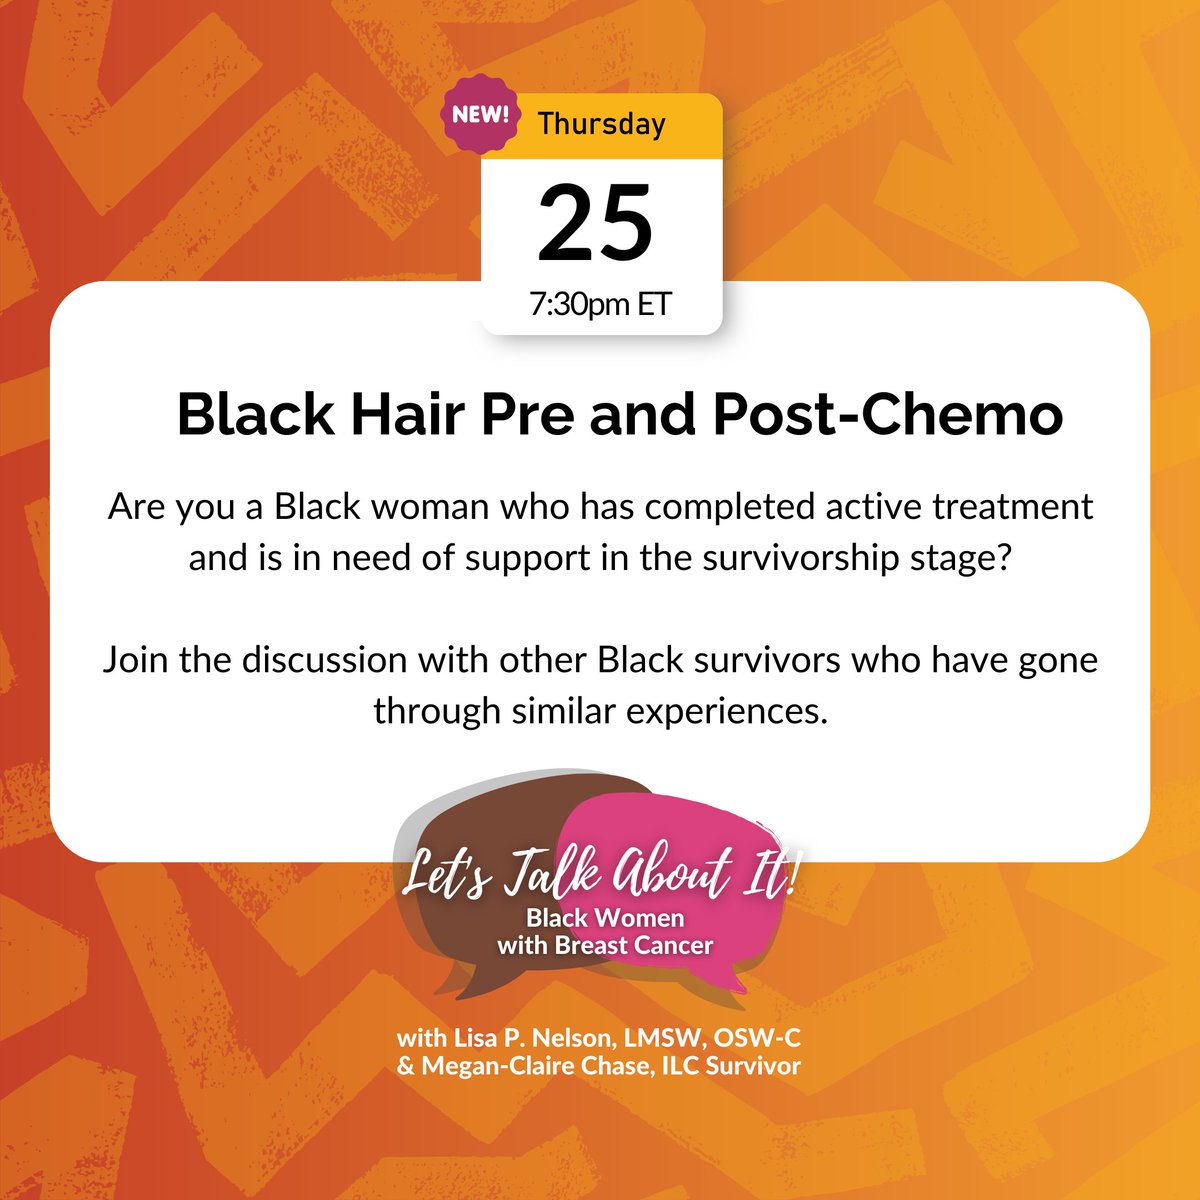 Black women beyond #BreastCancer treatment, this one's for YOU! 🌟 We’re talking black hair care pre- & post-chemo on April 25th @ 7:30 PM ET. Save your spot for FREE: bit.ly/3vWUyHe #BreastCancerSurvivors #BlackWomenSupport